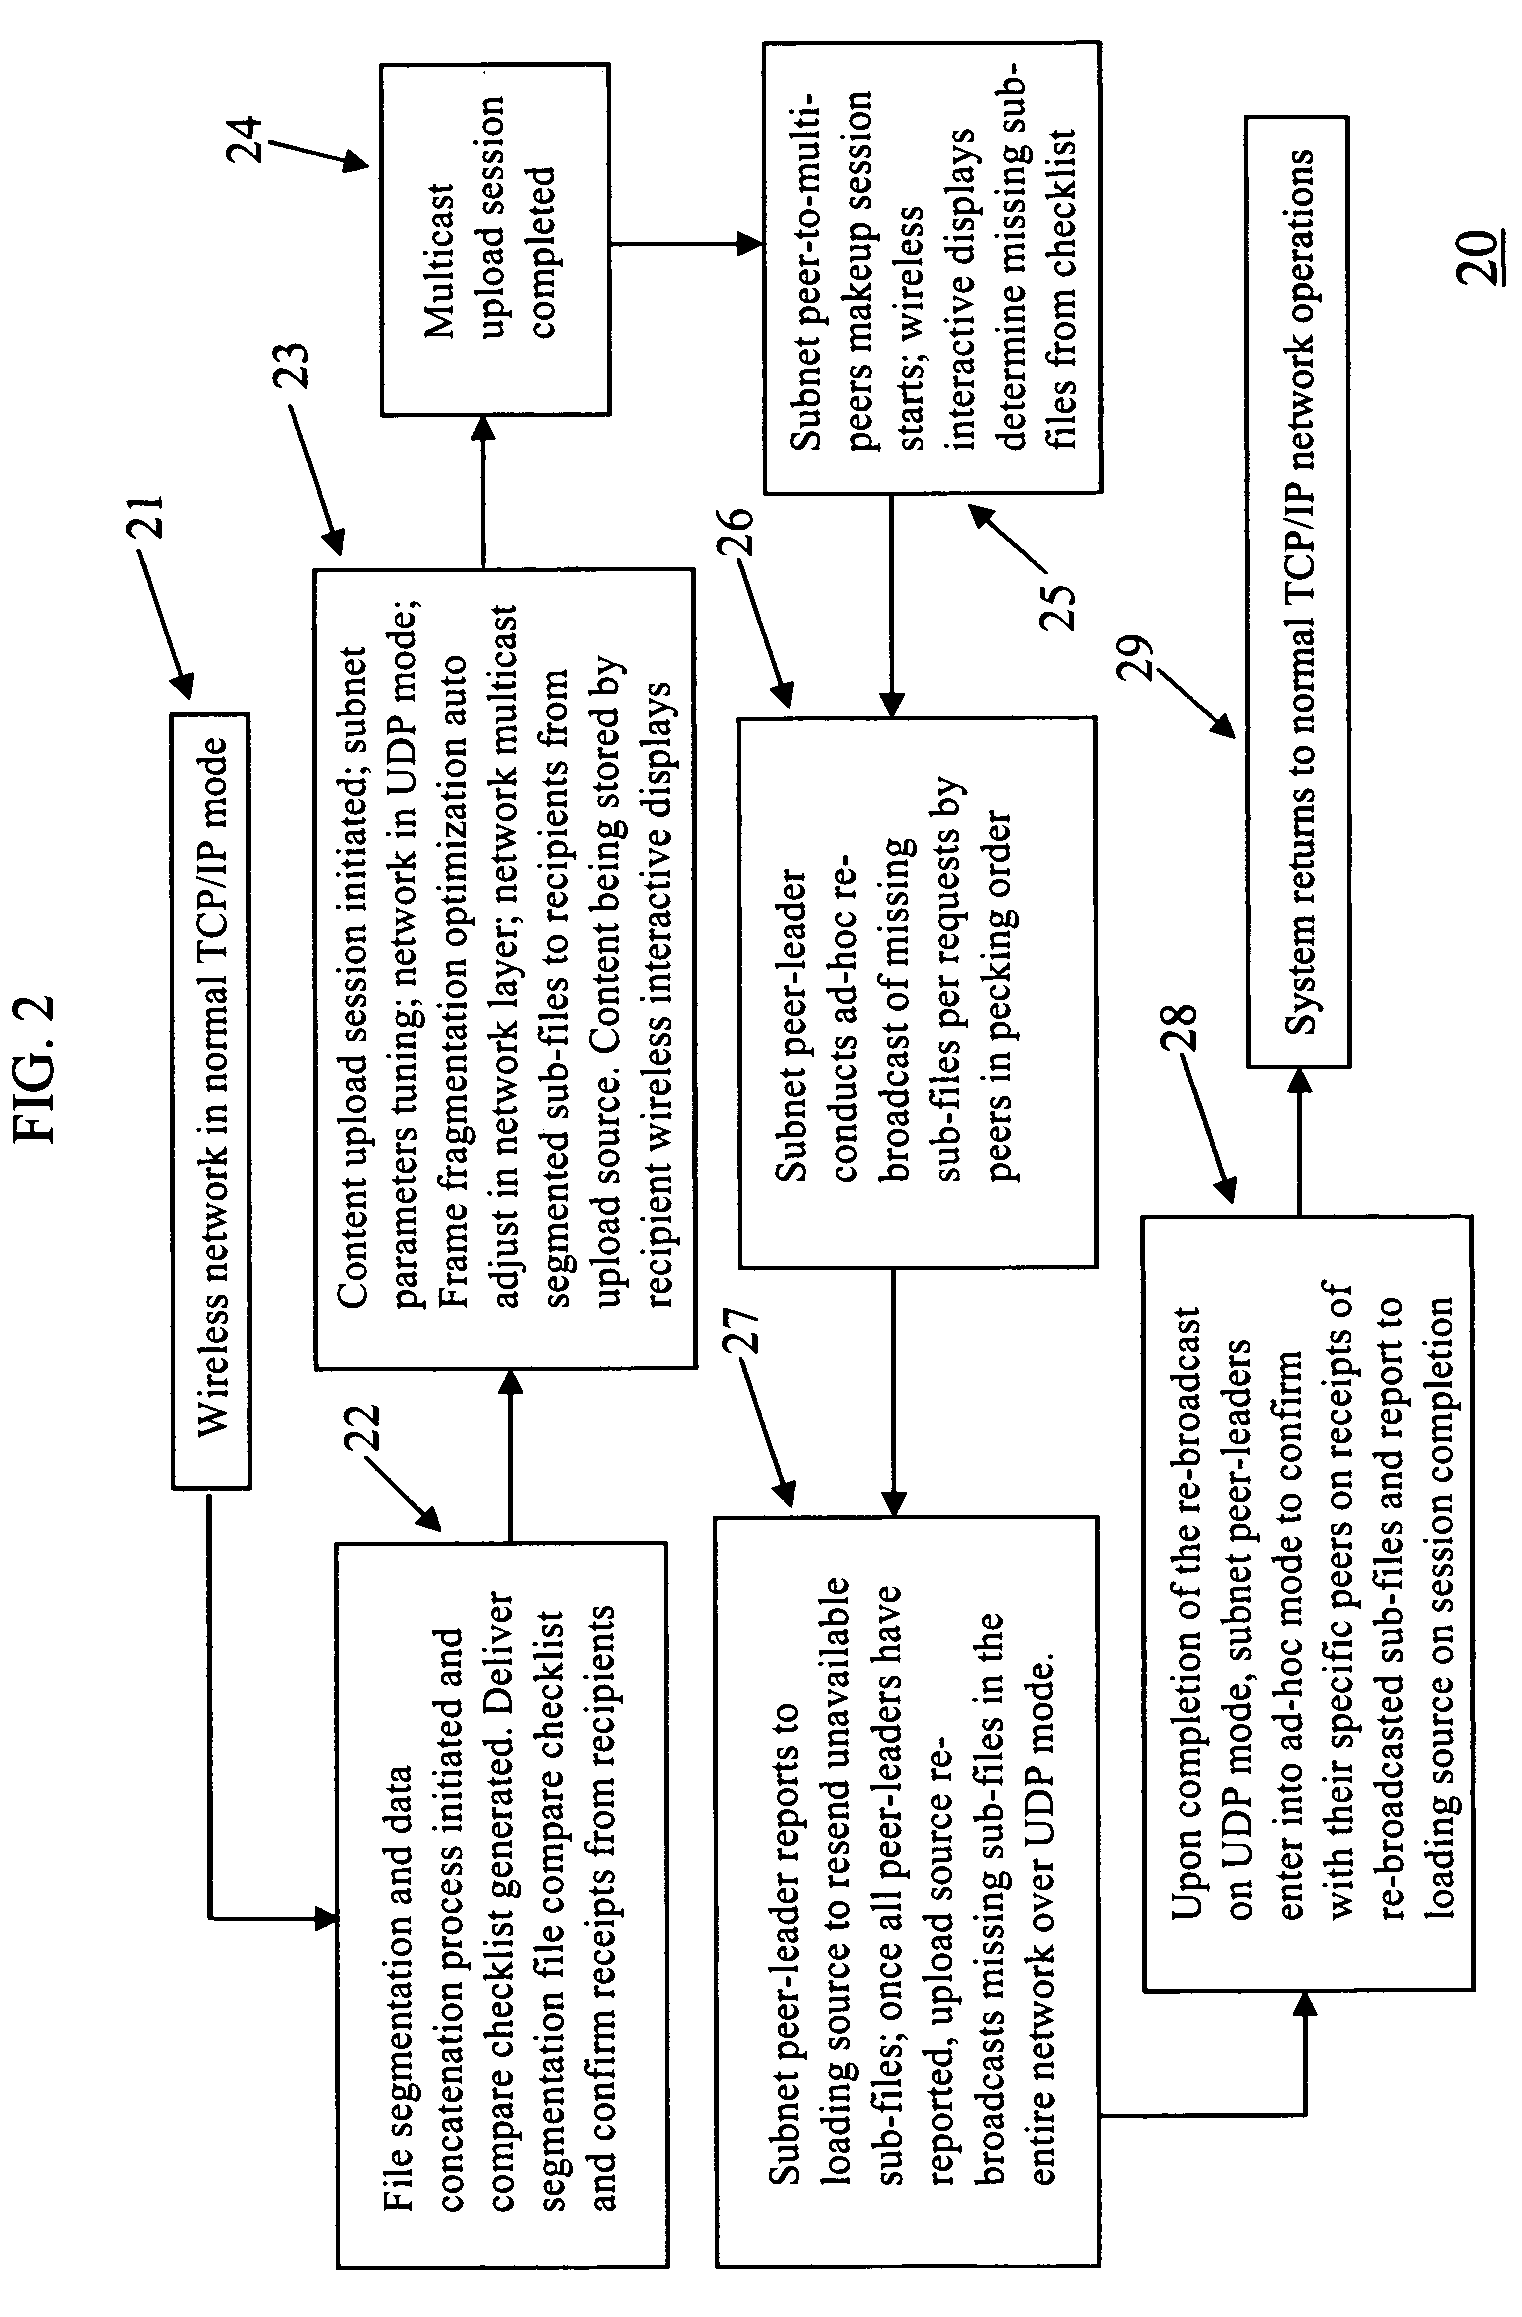 Wireless interactive entertainment and information display network systems